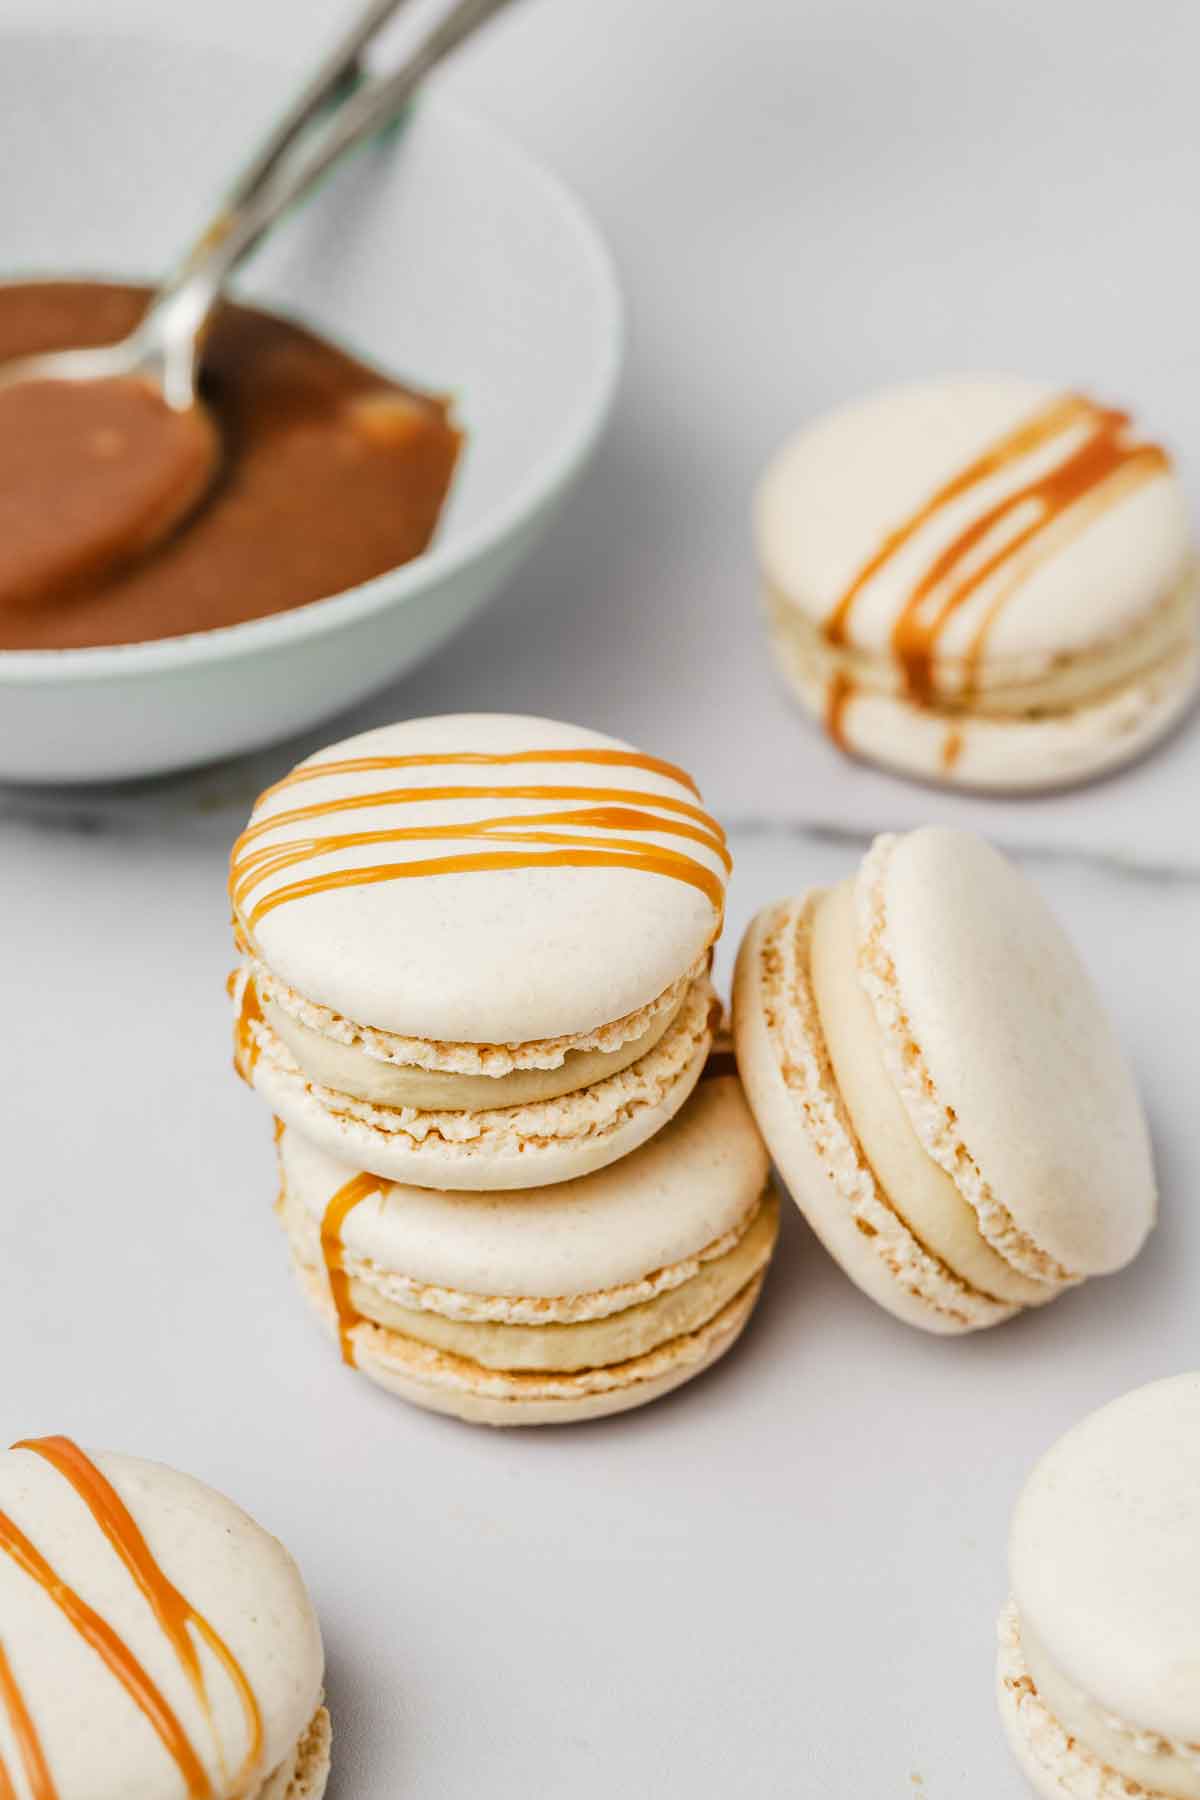 finished salted macarons on a table